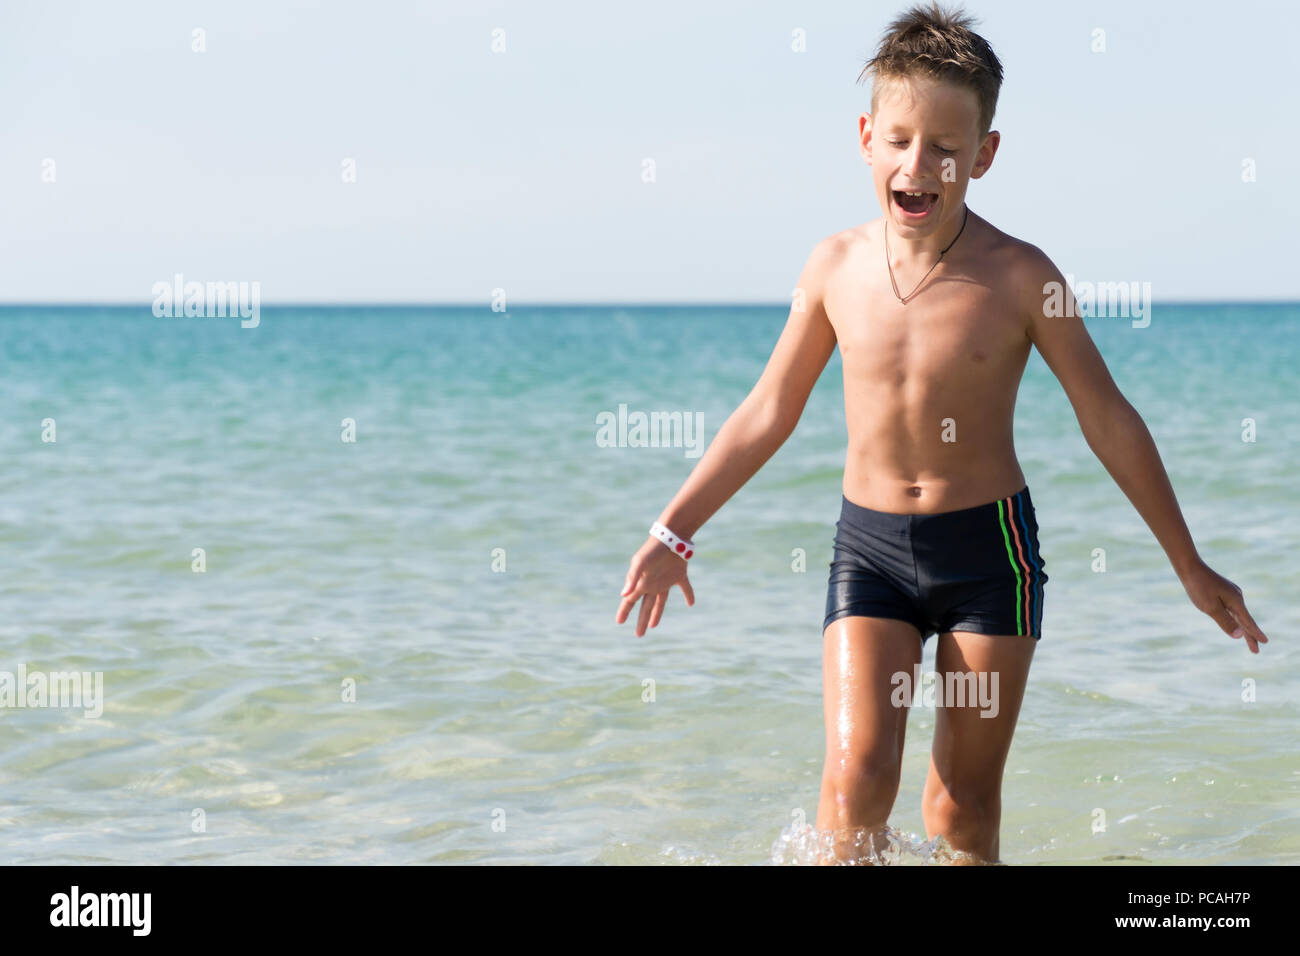 Cheerful boy sing a song on seashore background. childish spontaneity Stock Photo